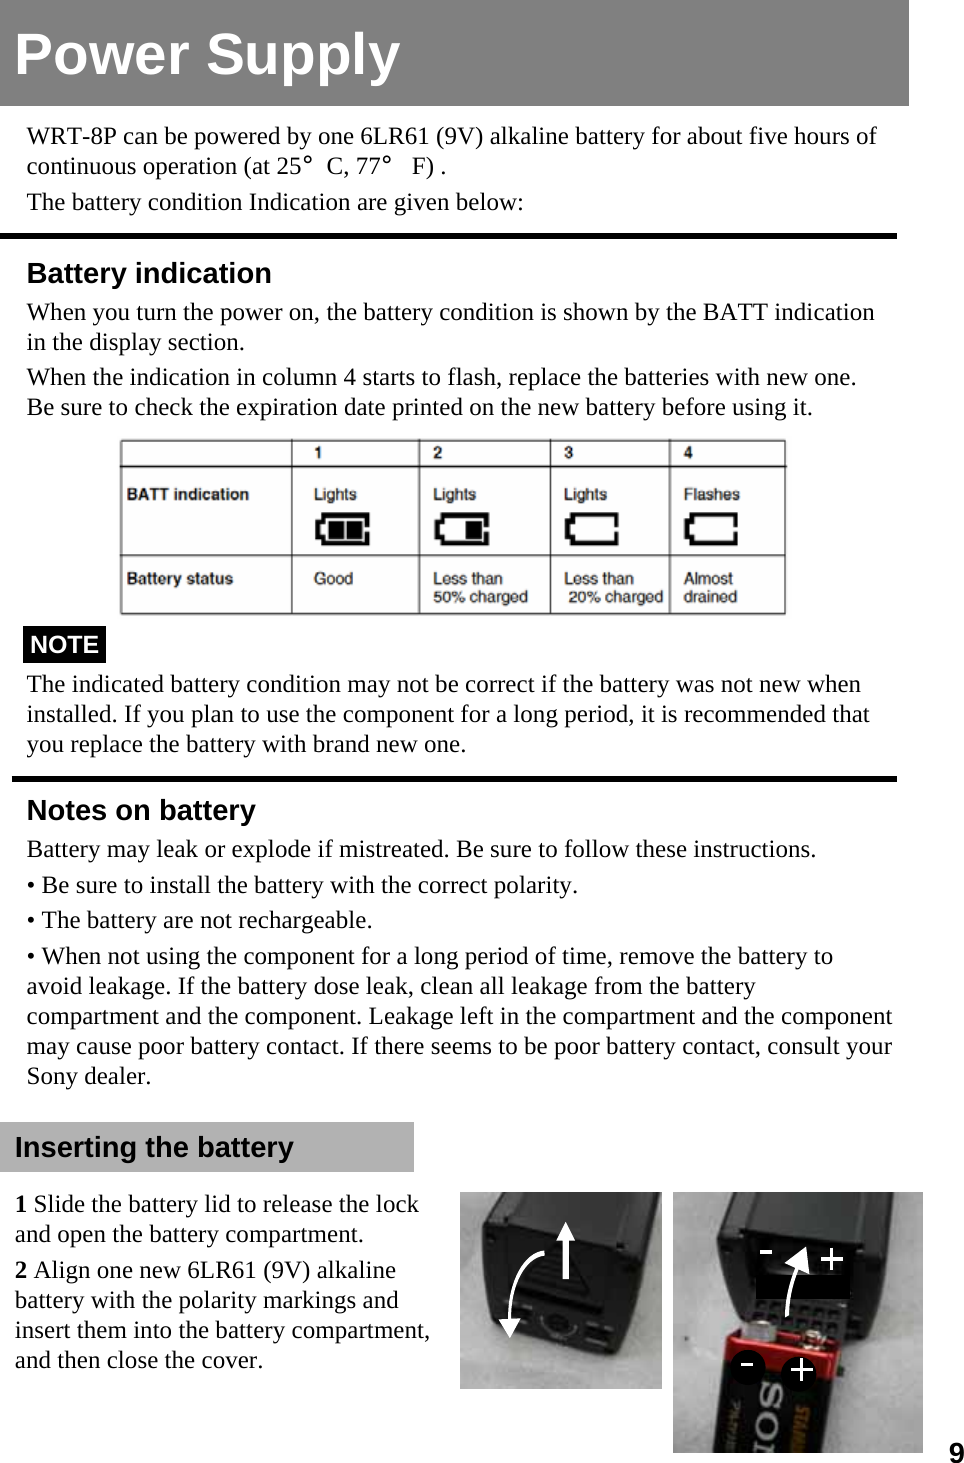 Power SupplyBattery indicationWhen you turn the power on, the battery condition is shown by the BATT indication in the display section.When the indication in column 4 starts to flash, replace the batteries with new one. Be sure to check the expiration date printed on the new battery before using it.The indicated battery condition may not be correct if the battery was not new when installed. If you plan to use the component for a long period, it is recommended that you replace the battery with brand new one.Notes on batteryBattery may leak or explode if mistreated. Be sure to follow these instructions.• Be sure to install the battery with the correct polarity.• The battery are not rechargeable.• When not using the component for a long period of time, remove the battery to avoid leakage. If the battery dose leak, clean all leakage from the battery compartment and the component. Leakage left in the compartment and the component may cause poor battery contact. If there seems to be poor battery contact, consult your Sony dealer.NOTEWRT-8P can be powered by one 6LR61 (9V) alkaline battery for about five hours of continuous operation (at 25°C, 77°F) . The battery condition Indication are given below:Inserting the battery1Slide the battery lid to release the lock and open the battery compartment.2Align one new 6LR61 (9V) alkaline battery with the polarity markings and insert them into the battery compartment, and then close the cover.9